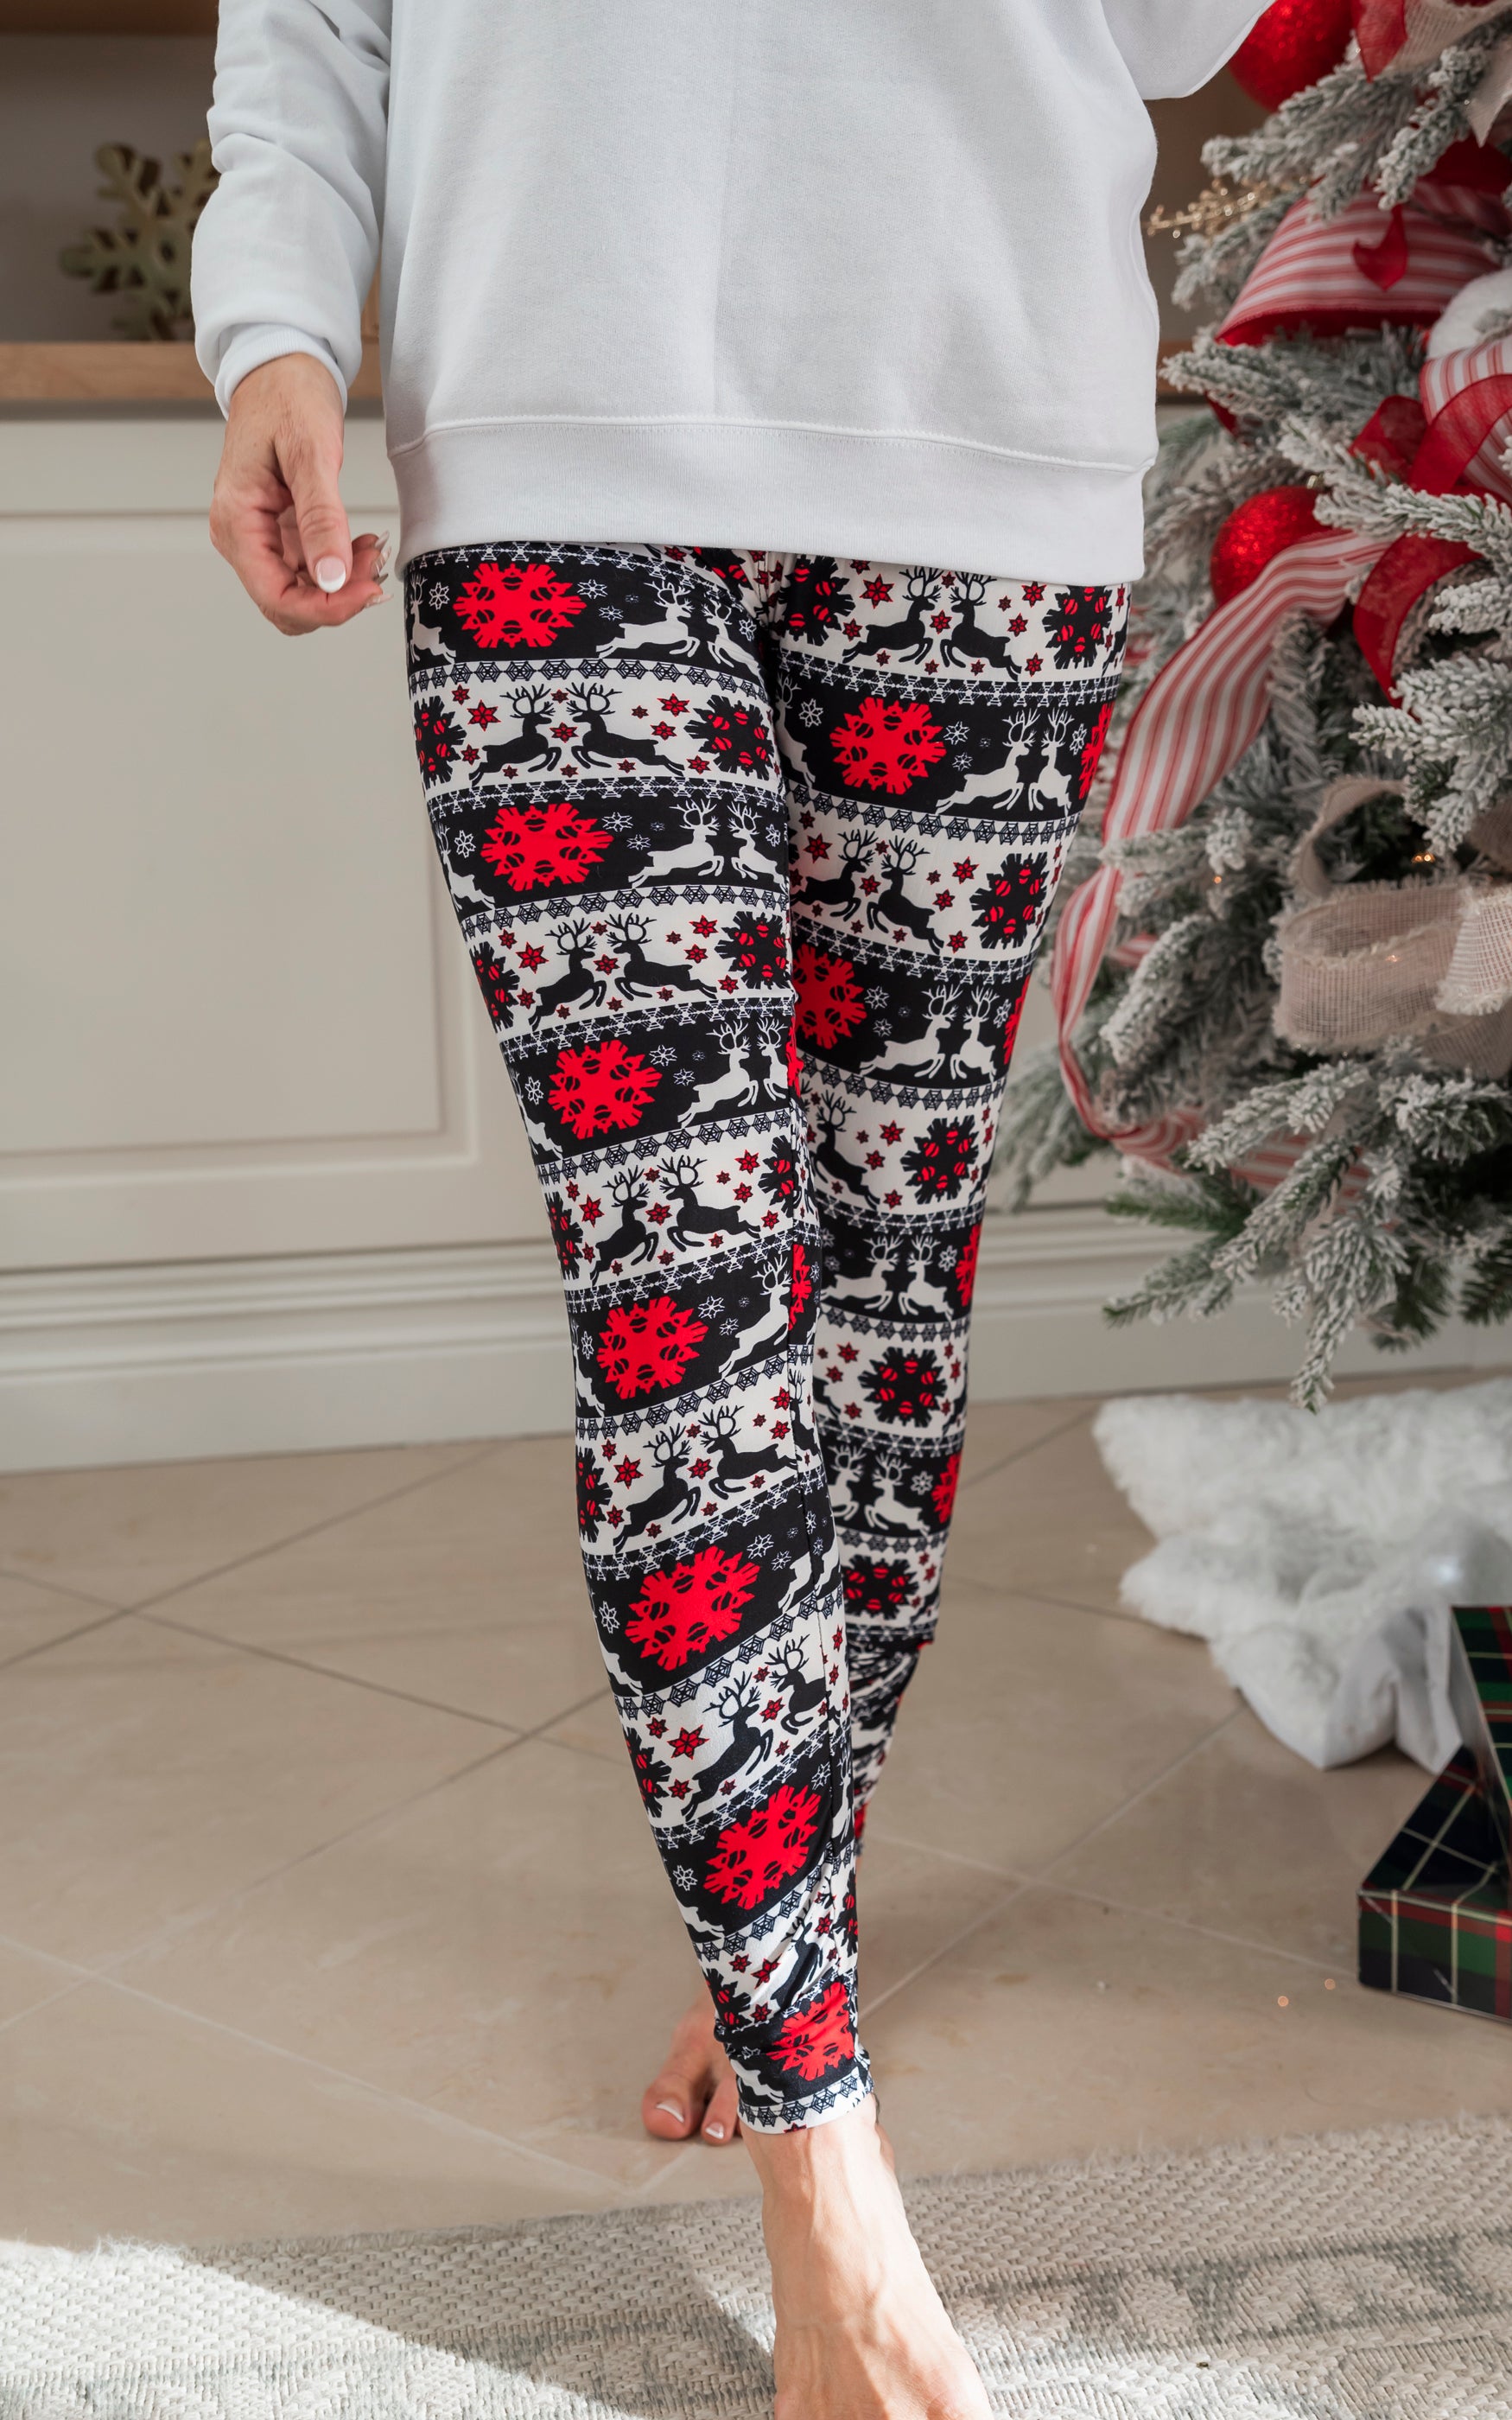 Buttery Soft Ruby Red Leaping Reindeer Christmas Plus Size Leggings